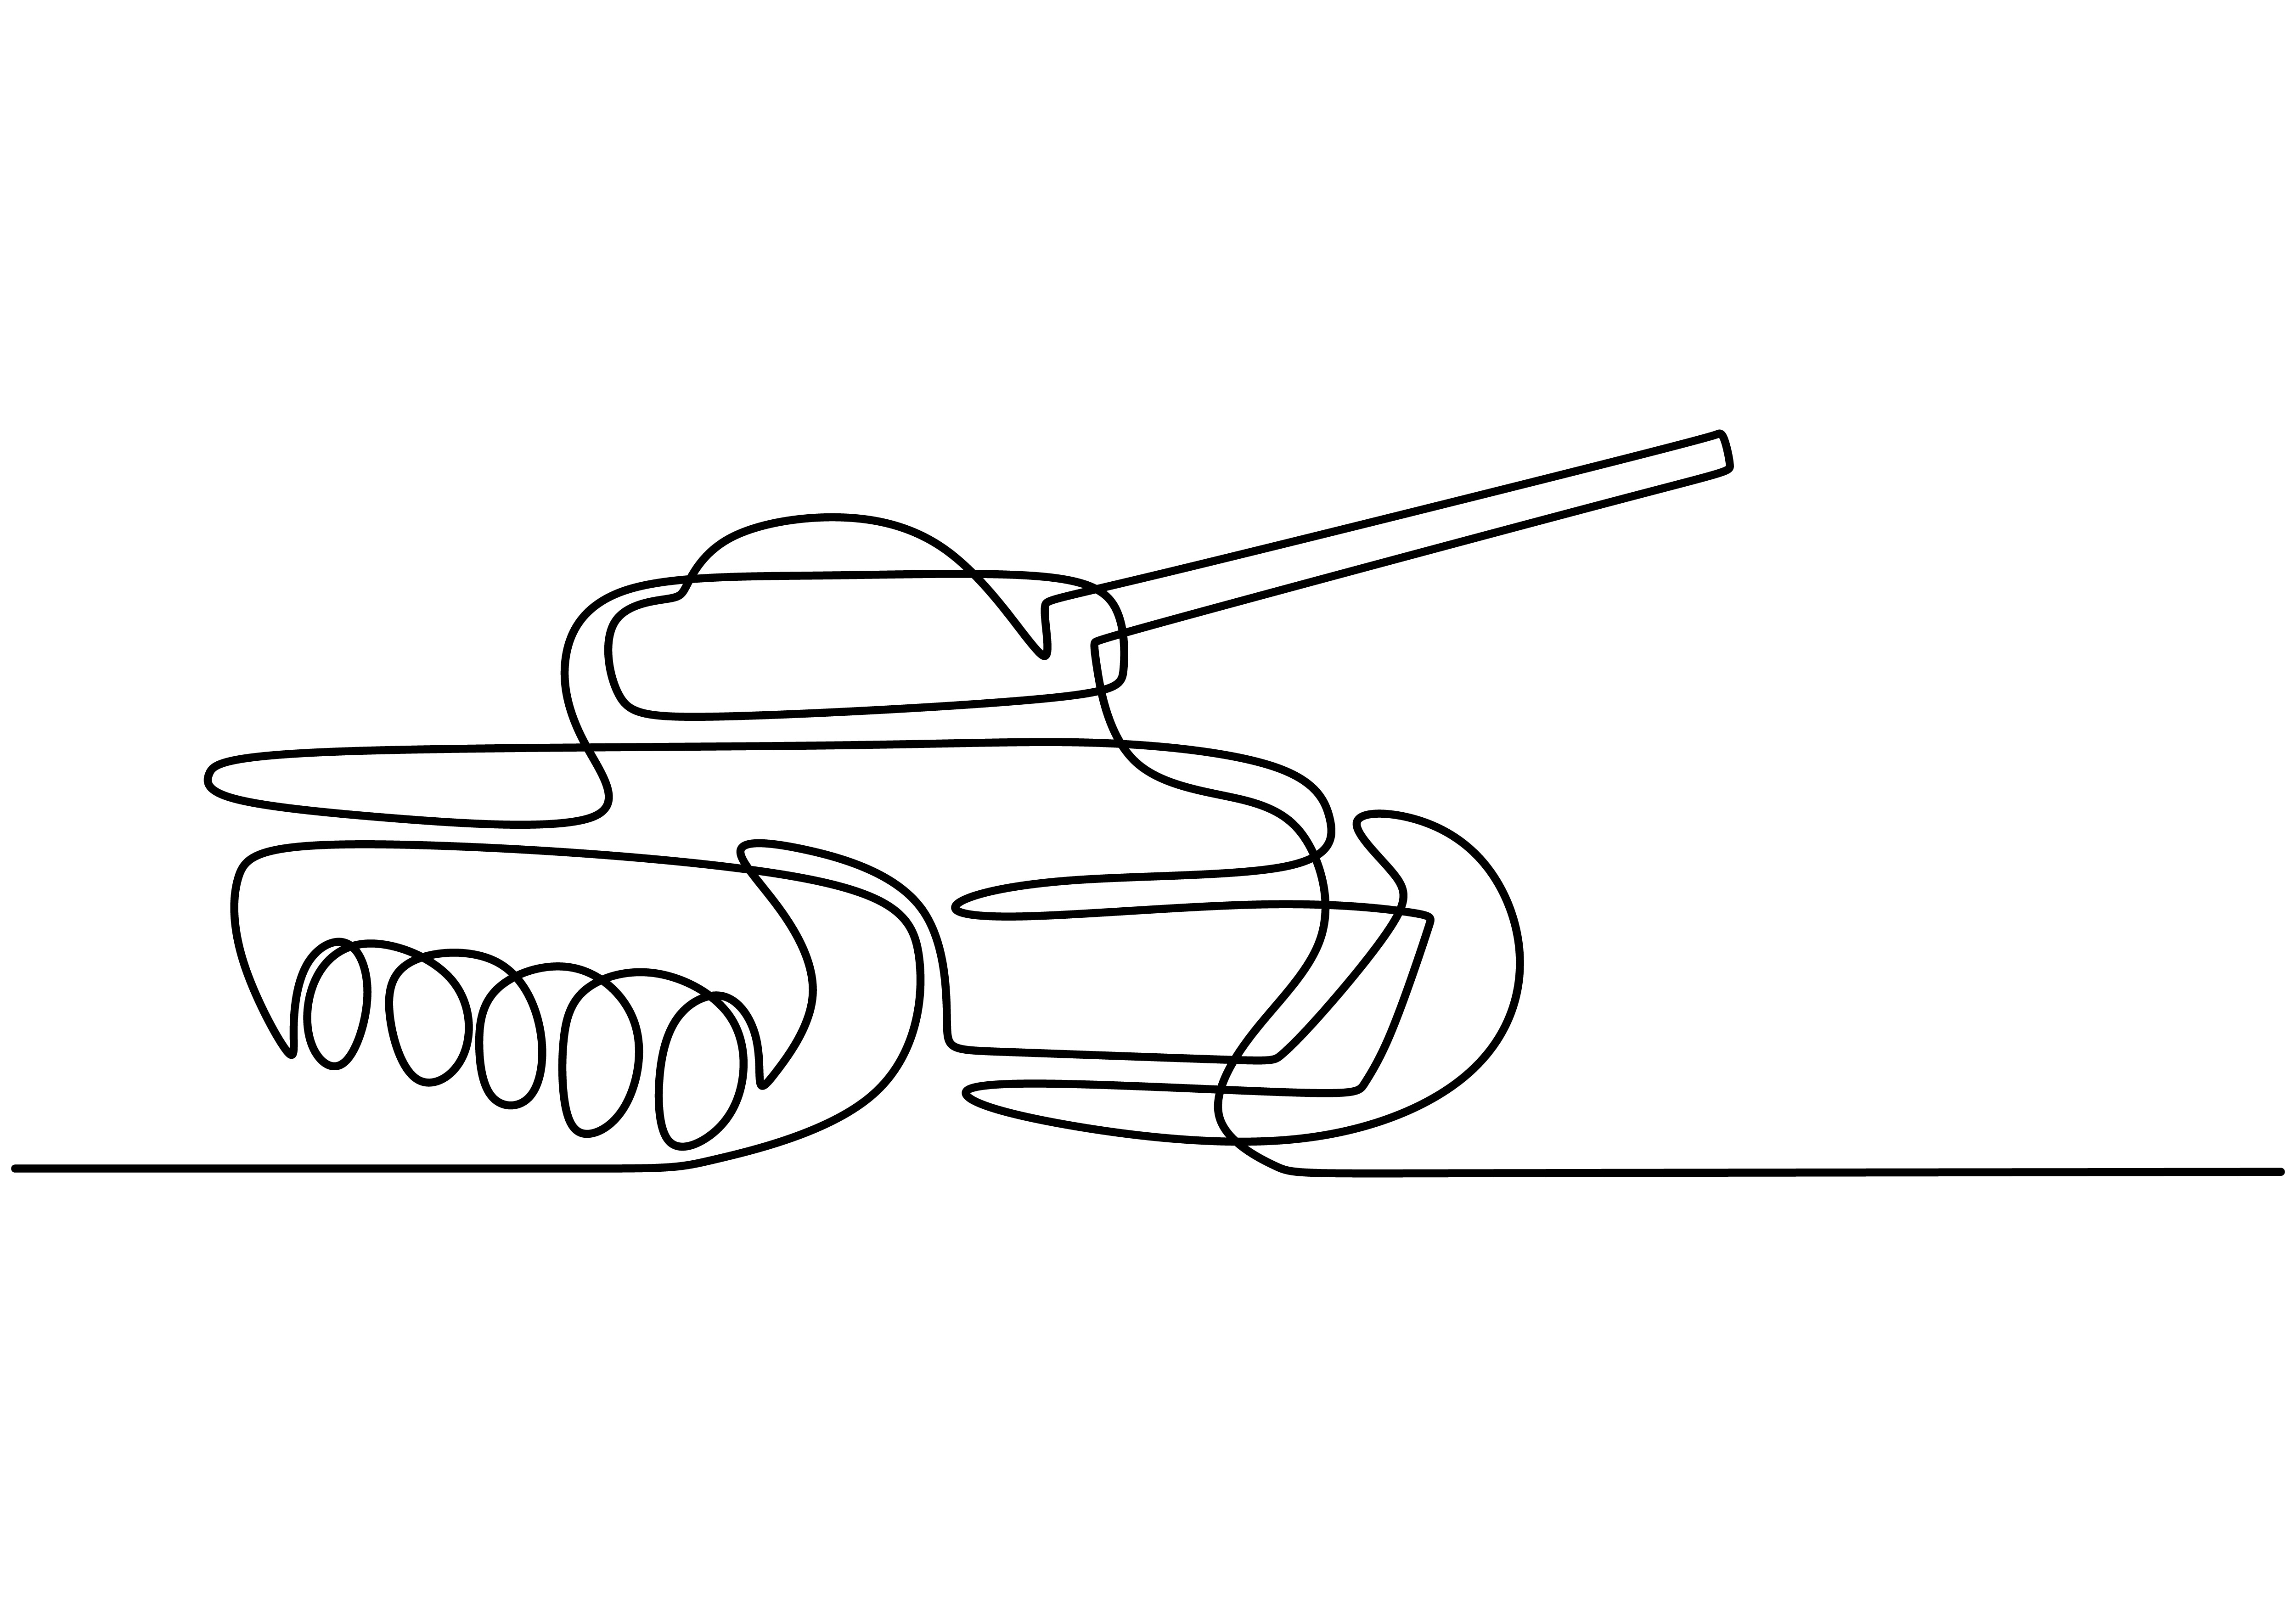 One Continuous Line Drawing Of Tank An Armored Fighting Vehicle Designed For Front Line Combat And War Download Free Vectors Clipart Graphics Vector Art